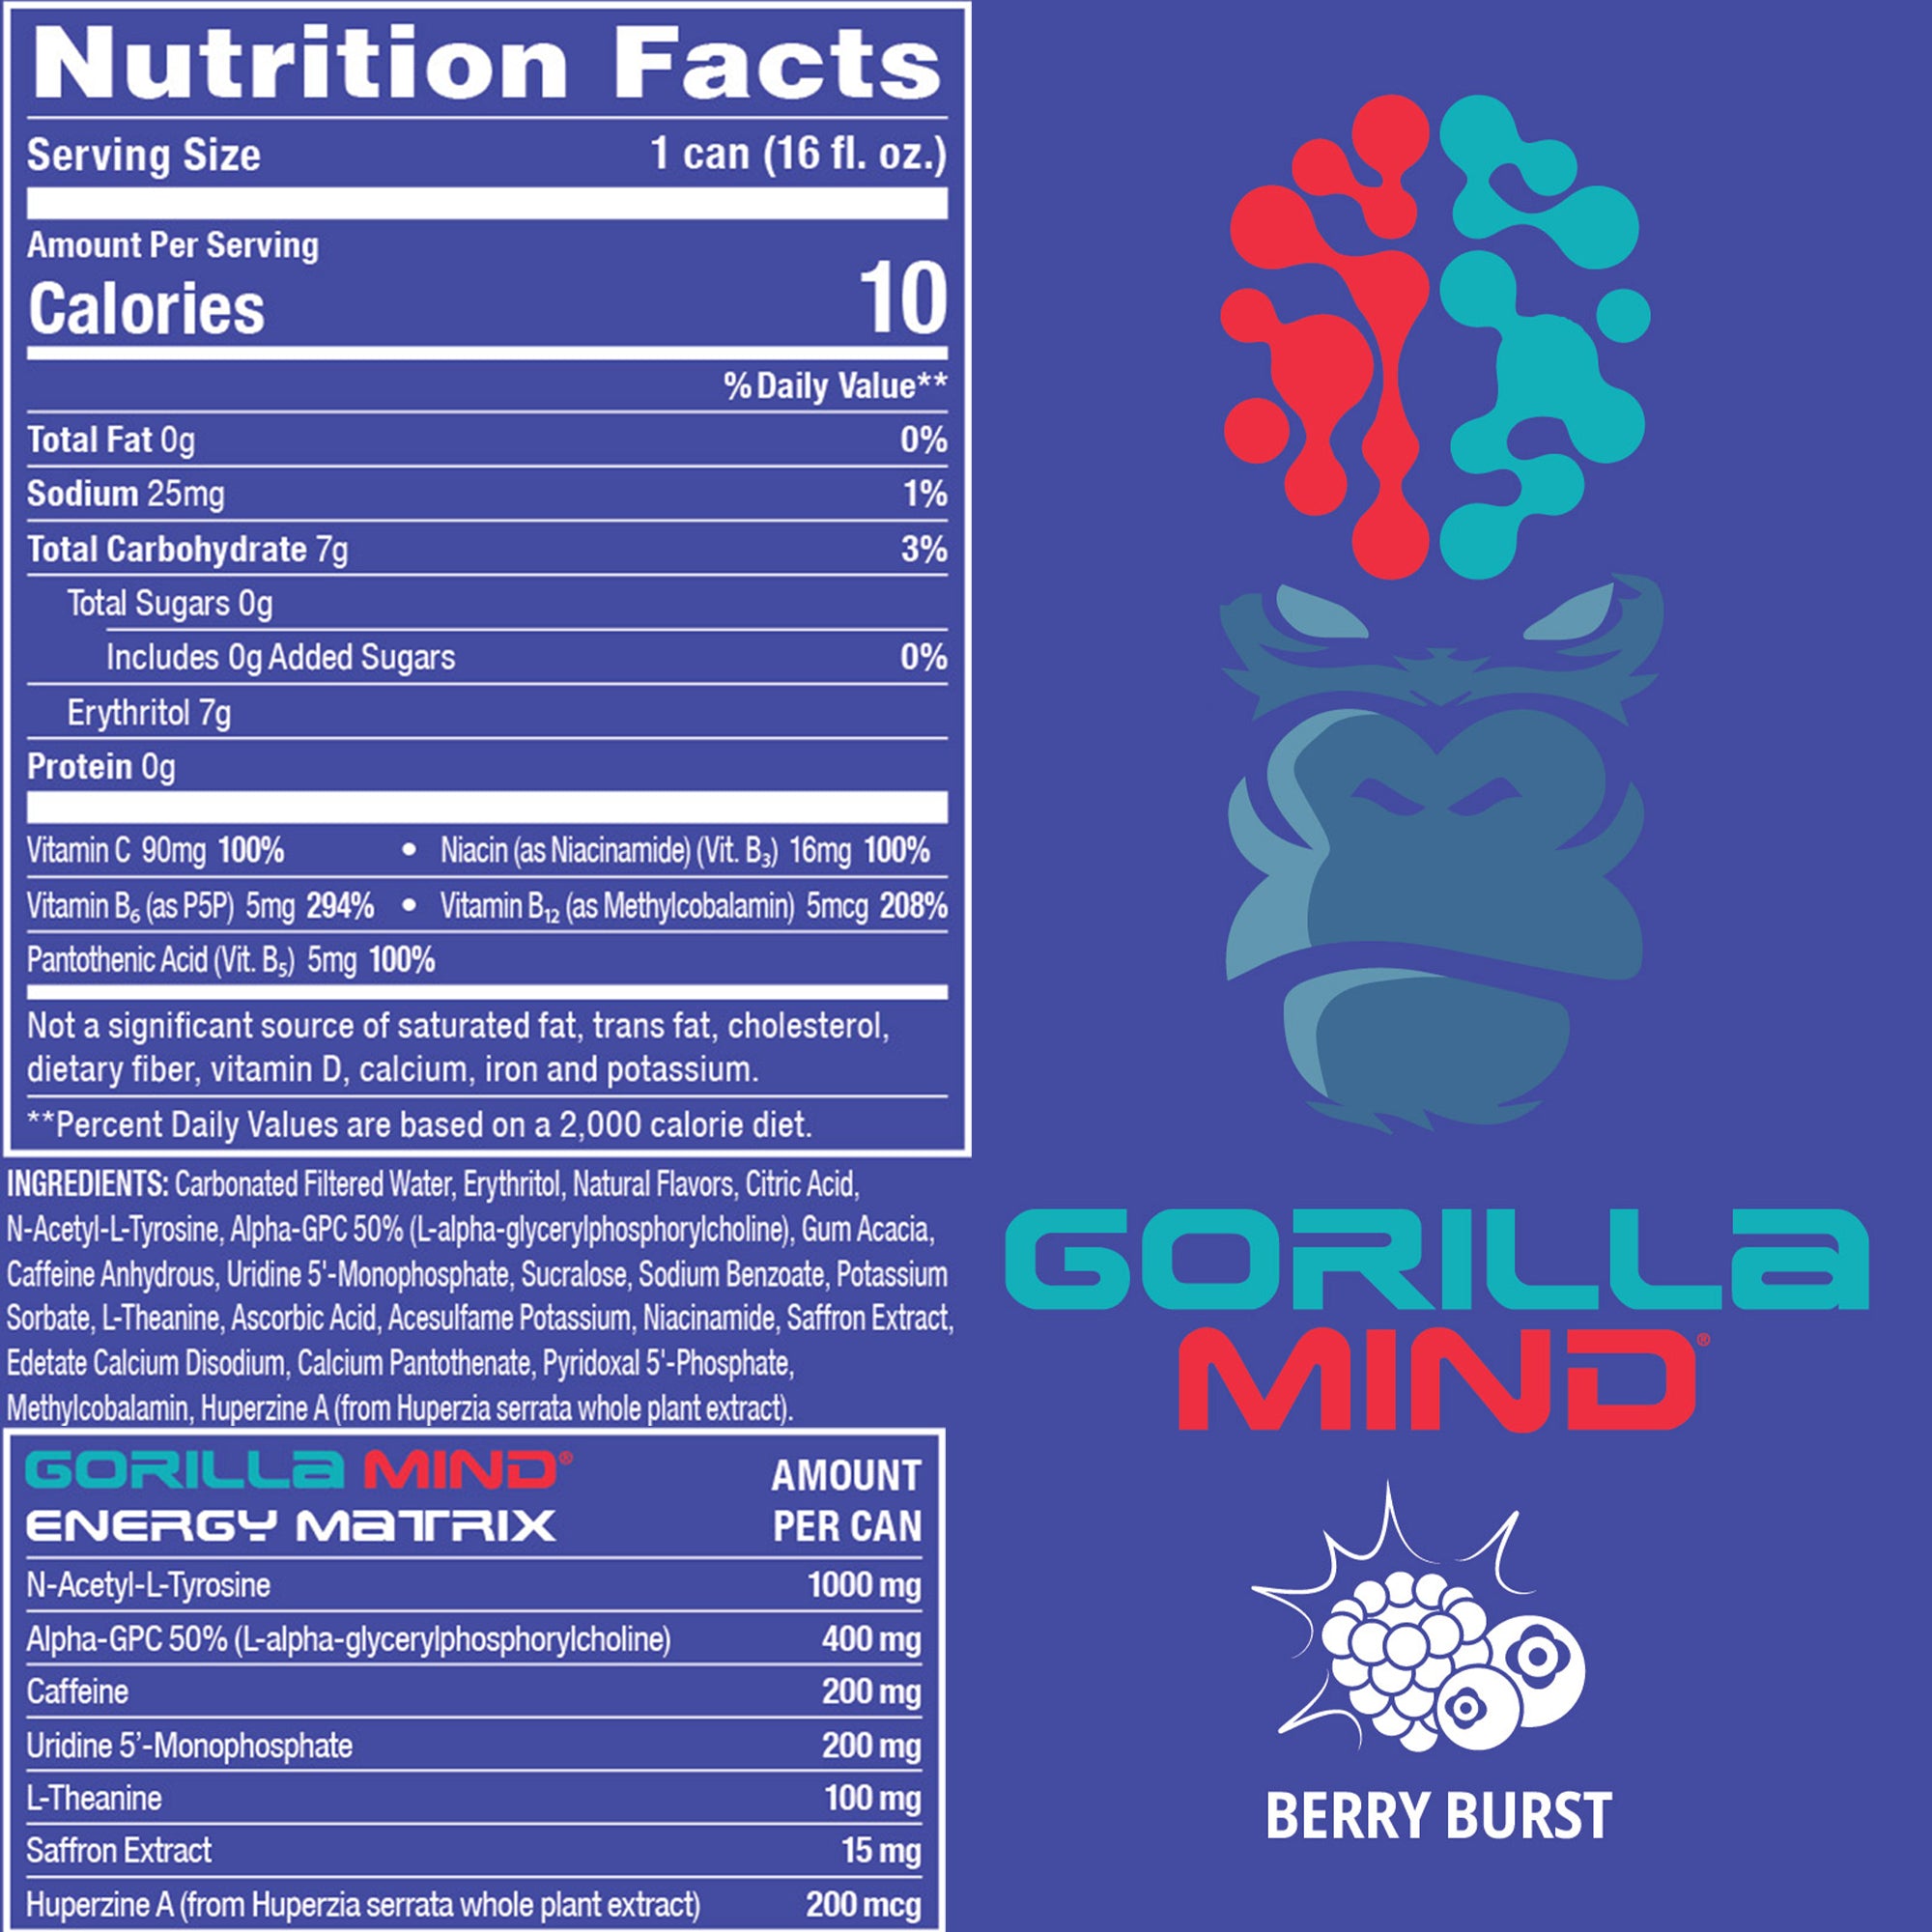 Berry Burst Nutrition Facts